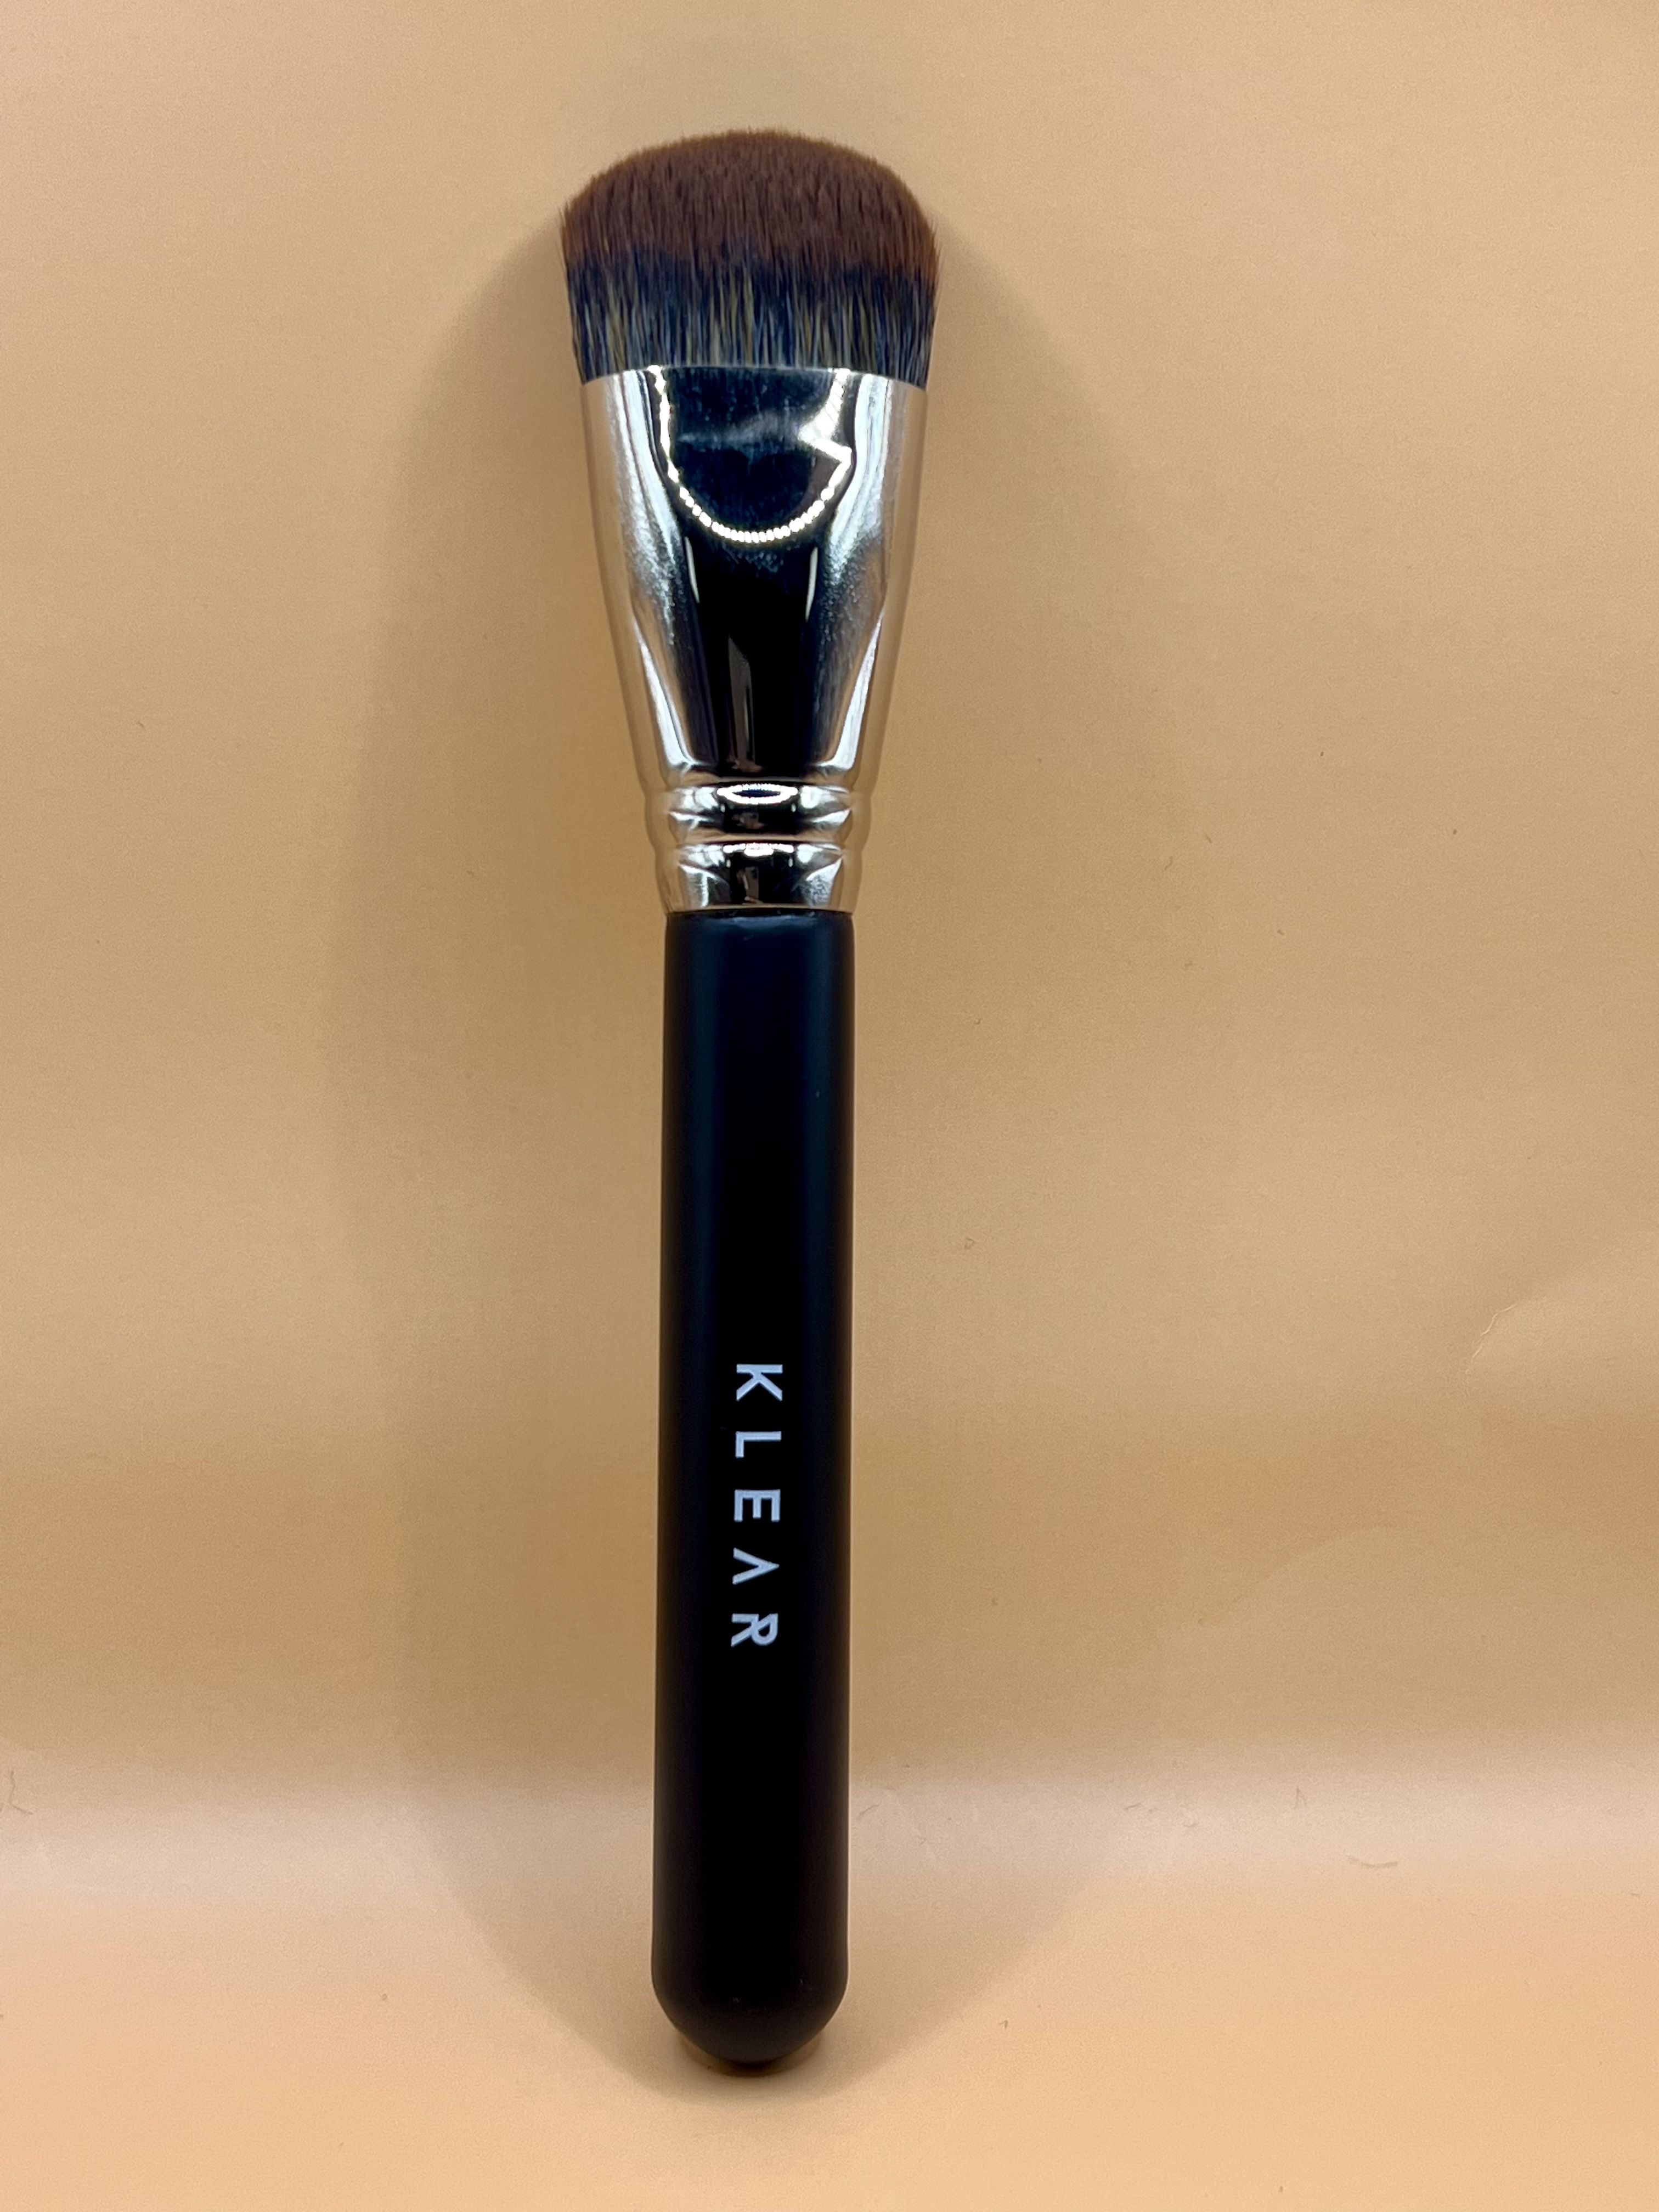 THE TOOL LAB 101 Multitasker Foundation Makeup Brush - Flat Top Face  Perfect Liquidfoundation Blending Liquid, Cream or Flawless Cosmetics,  Buffing